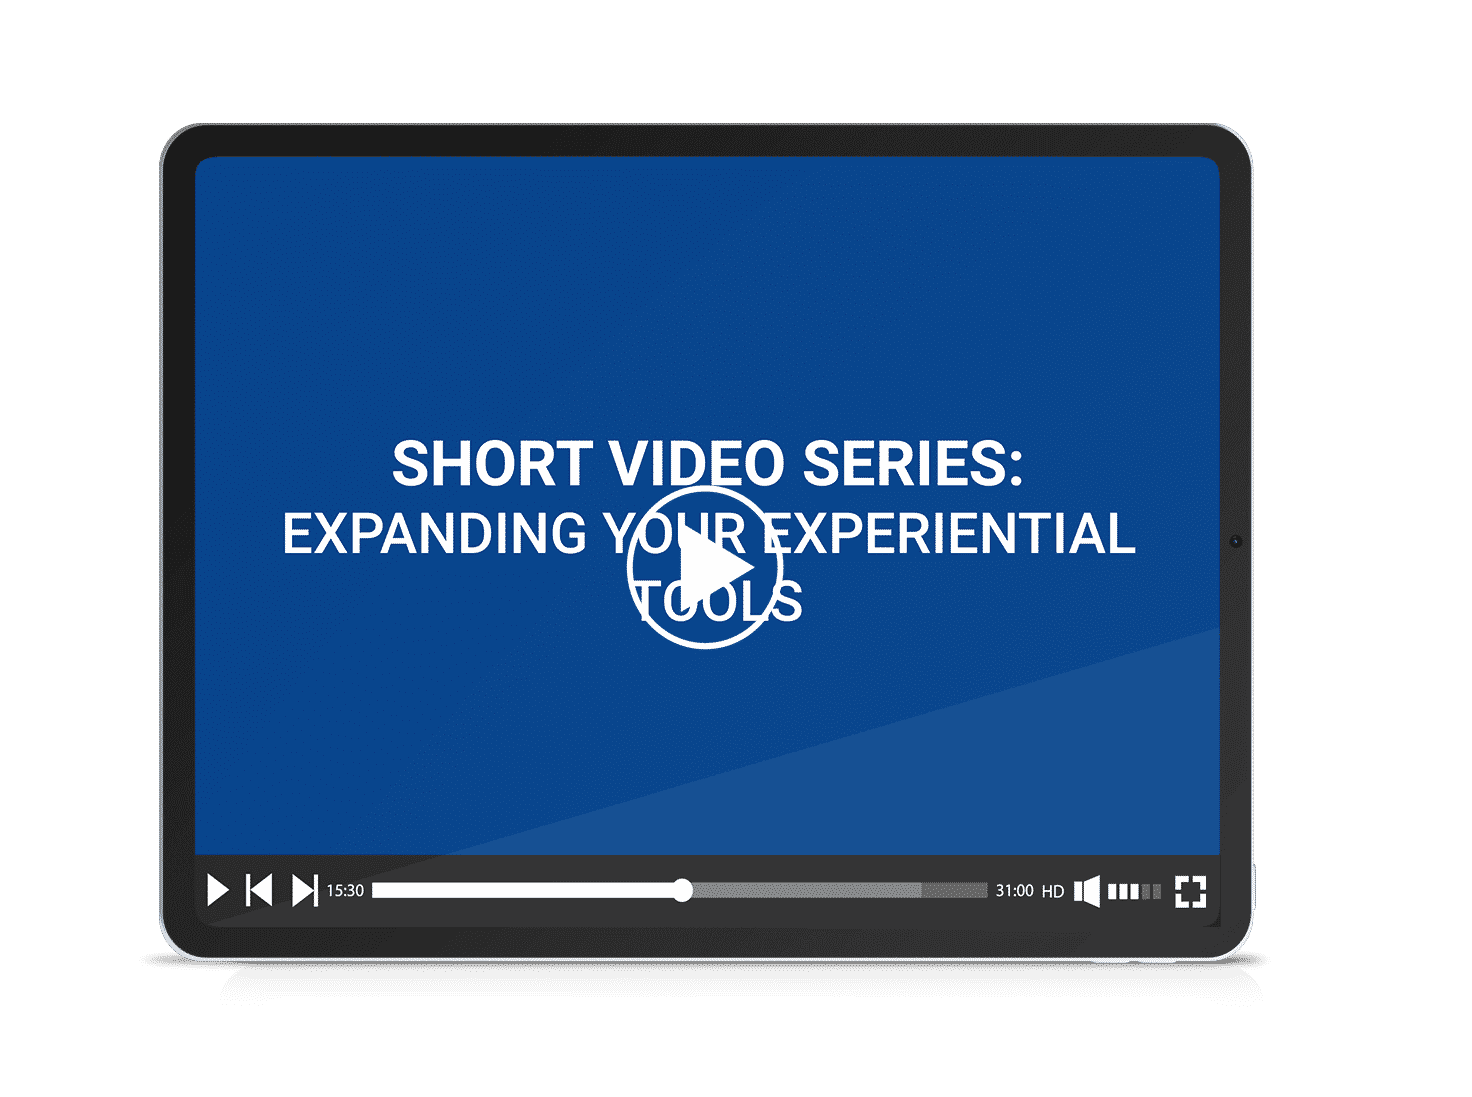 6. Short video series - Expanding Your Experiential Tools